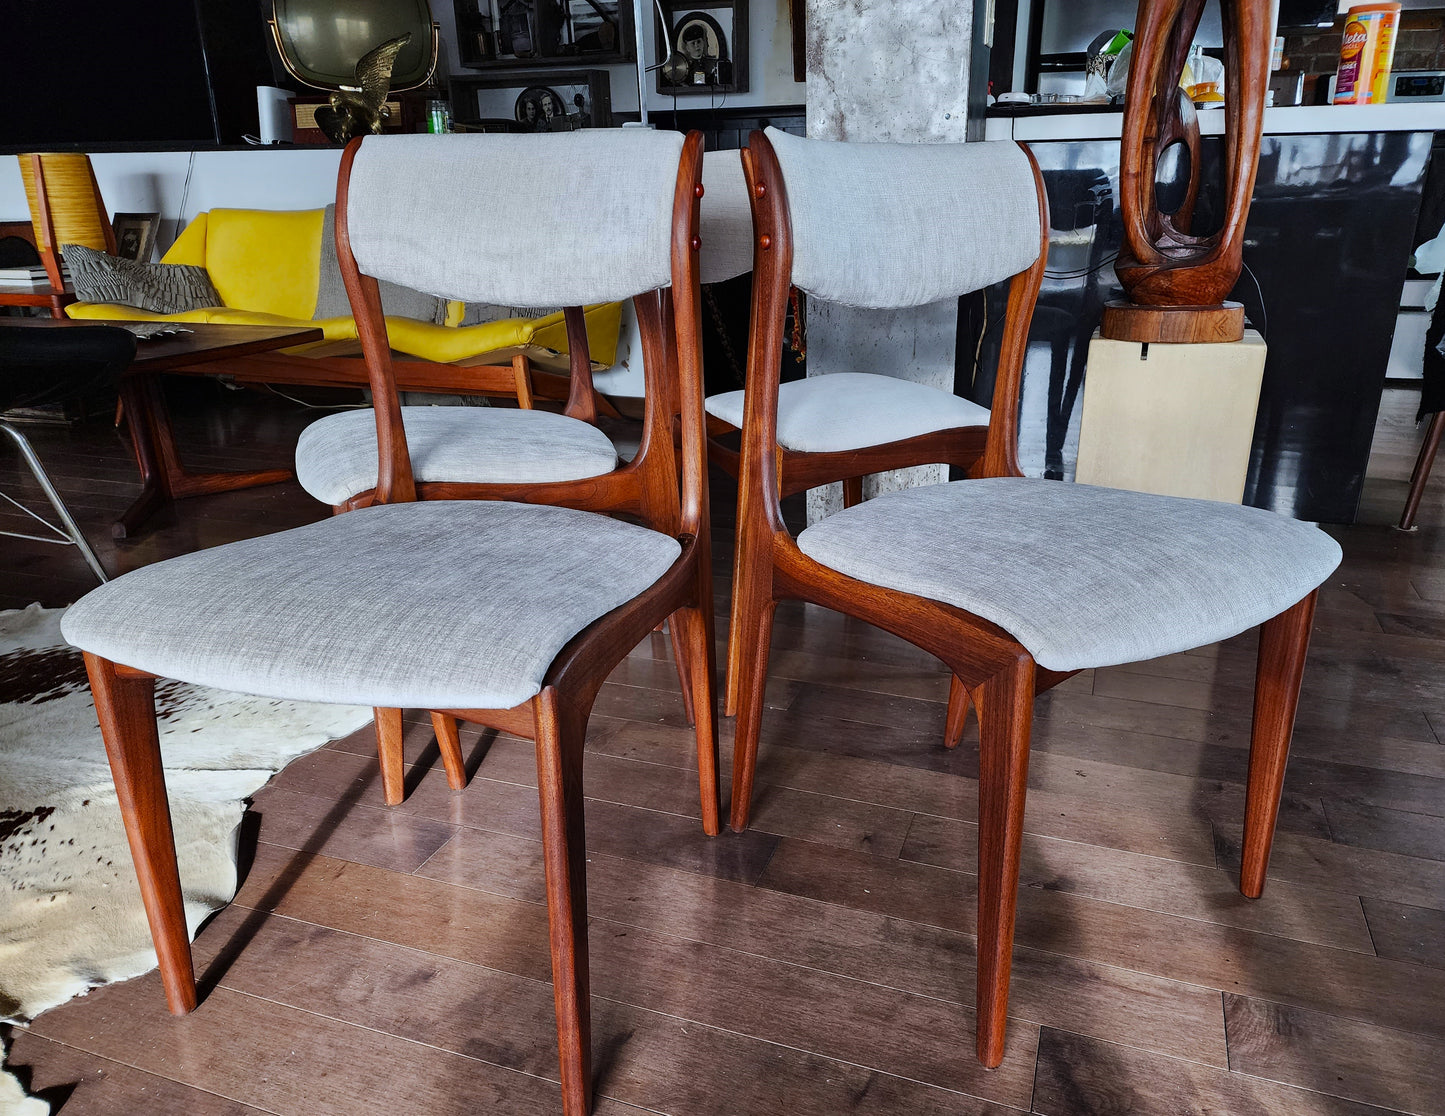 4 REFINISHED REUPHOLSTERED Mid Century Modern Walnut Chairs